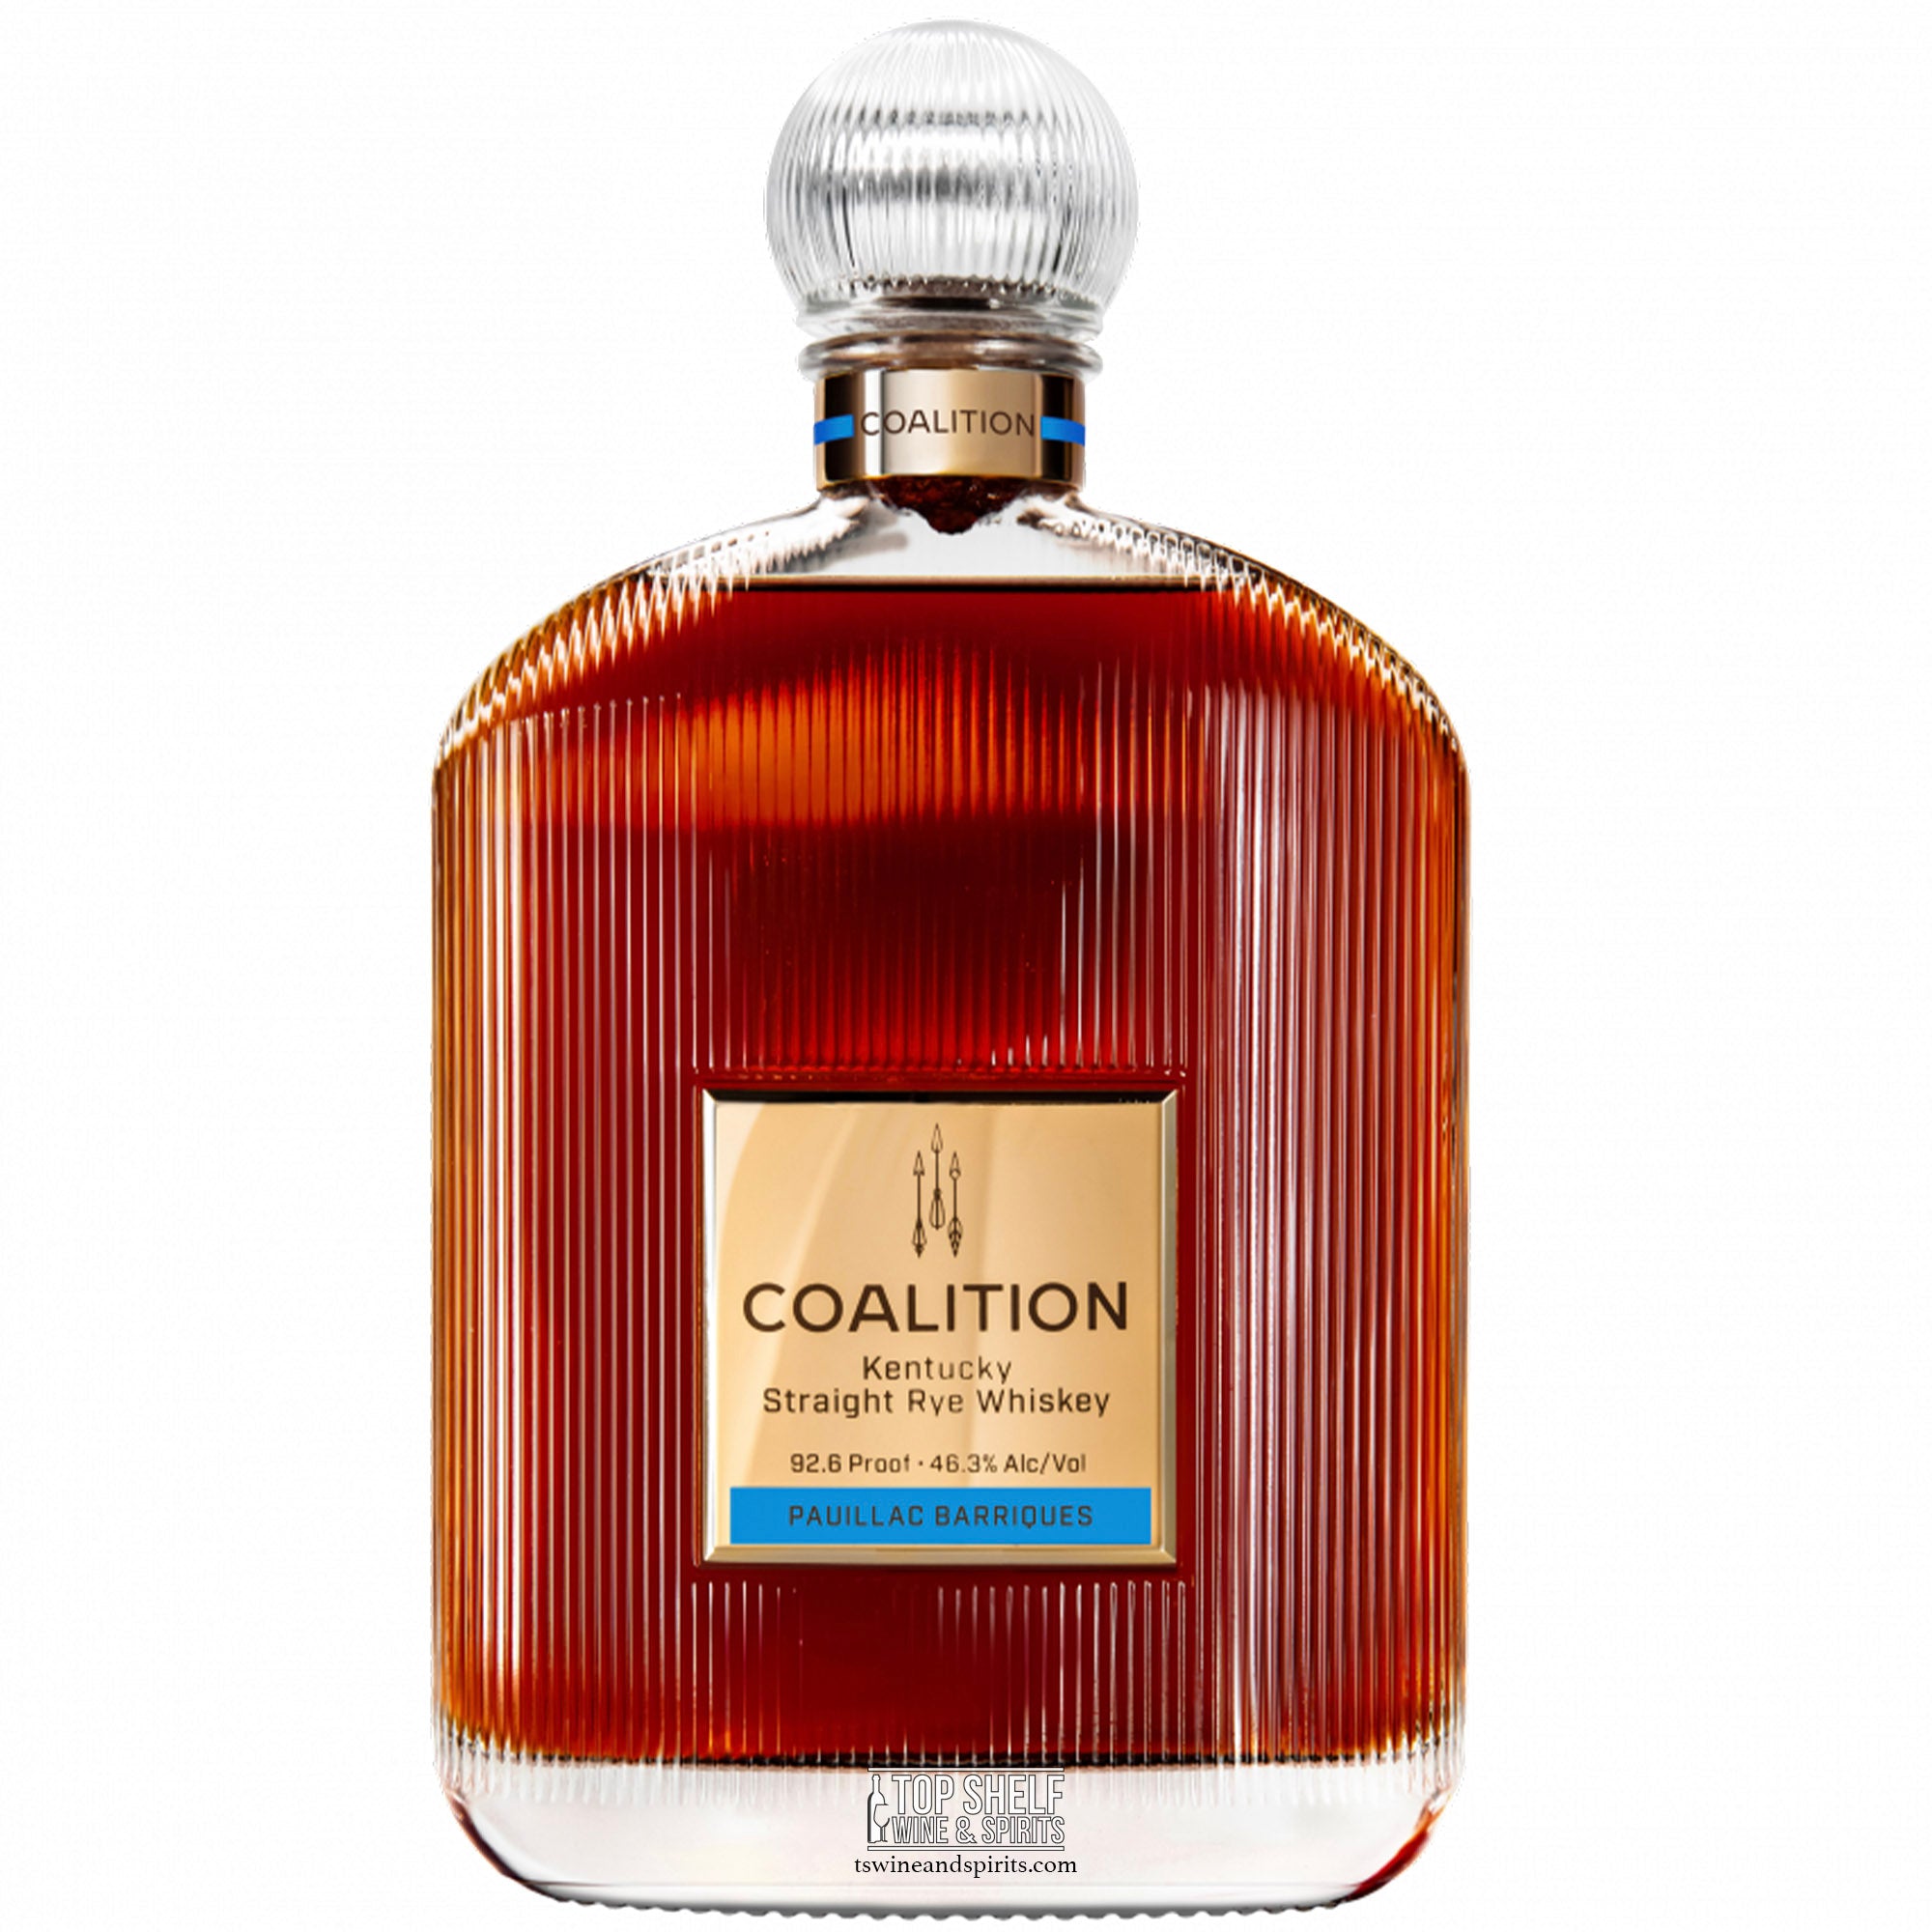 Coalition Kentucky Straight Rye Whiskey - Pauillac Barriques